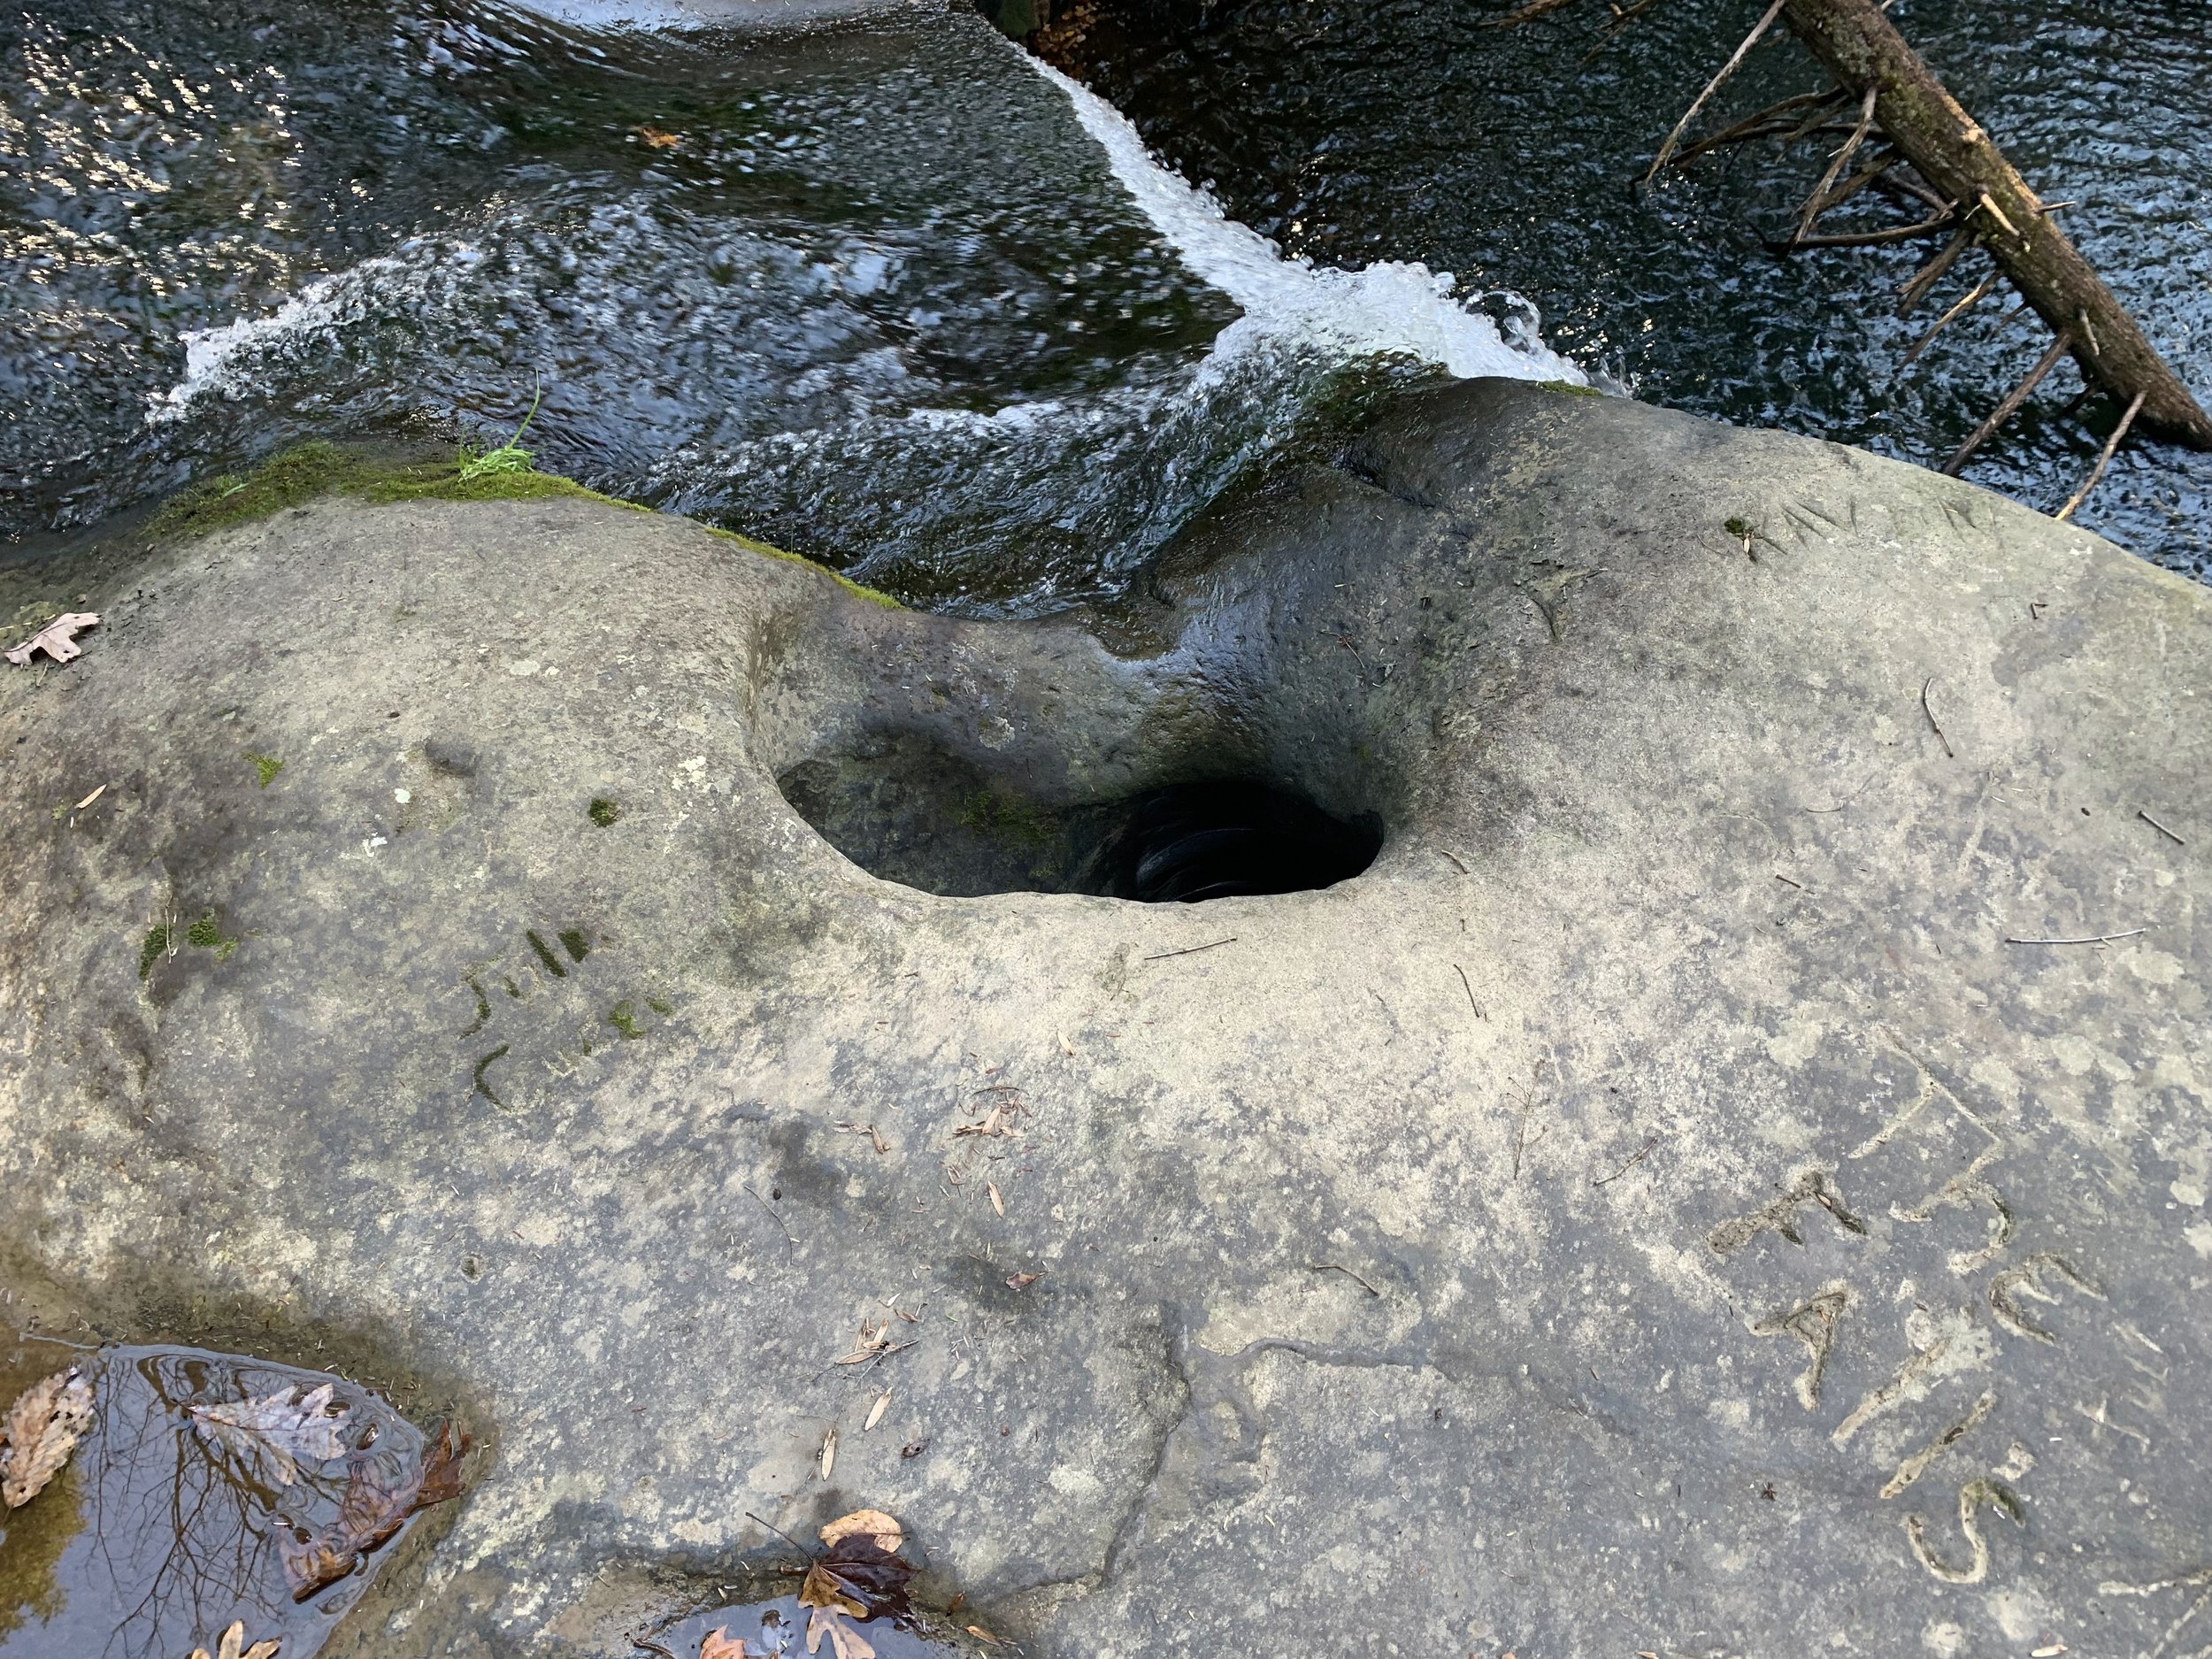 Top of the Falls, That Little Hole is a Separate Drain When the Water is Up